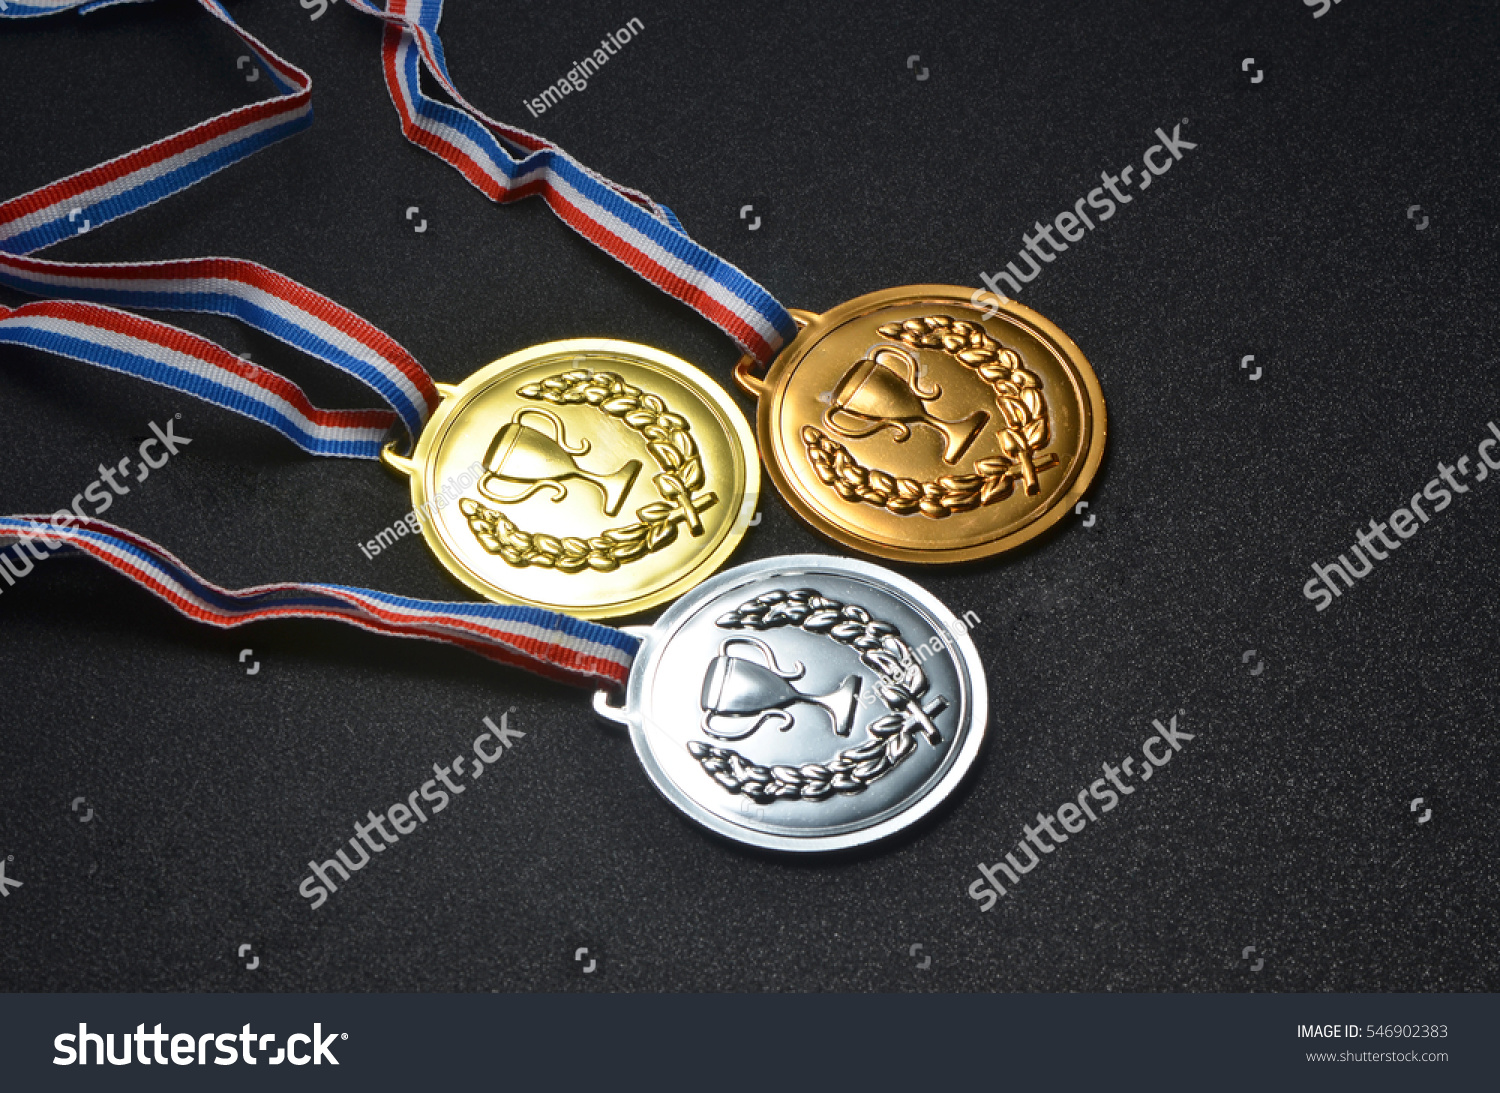 Gold, silver and bronze medals on top of black board